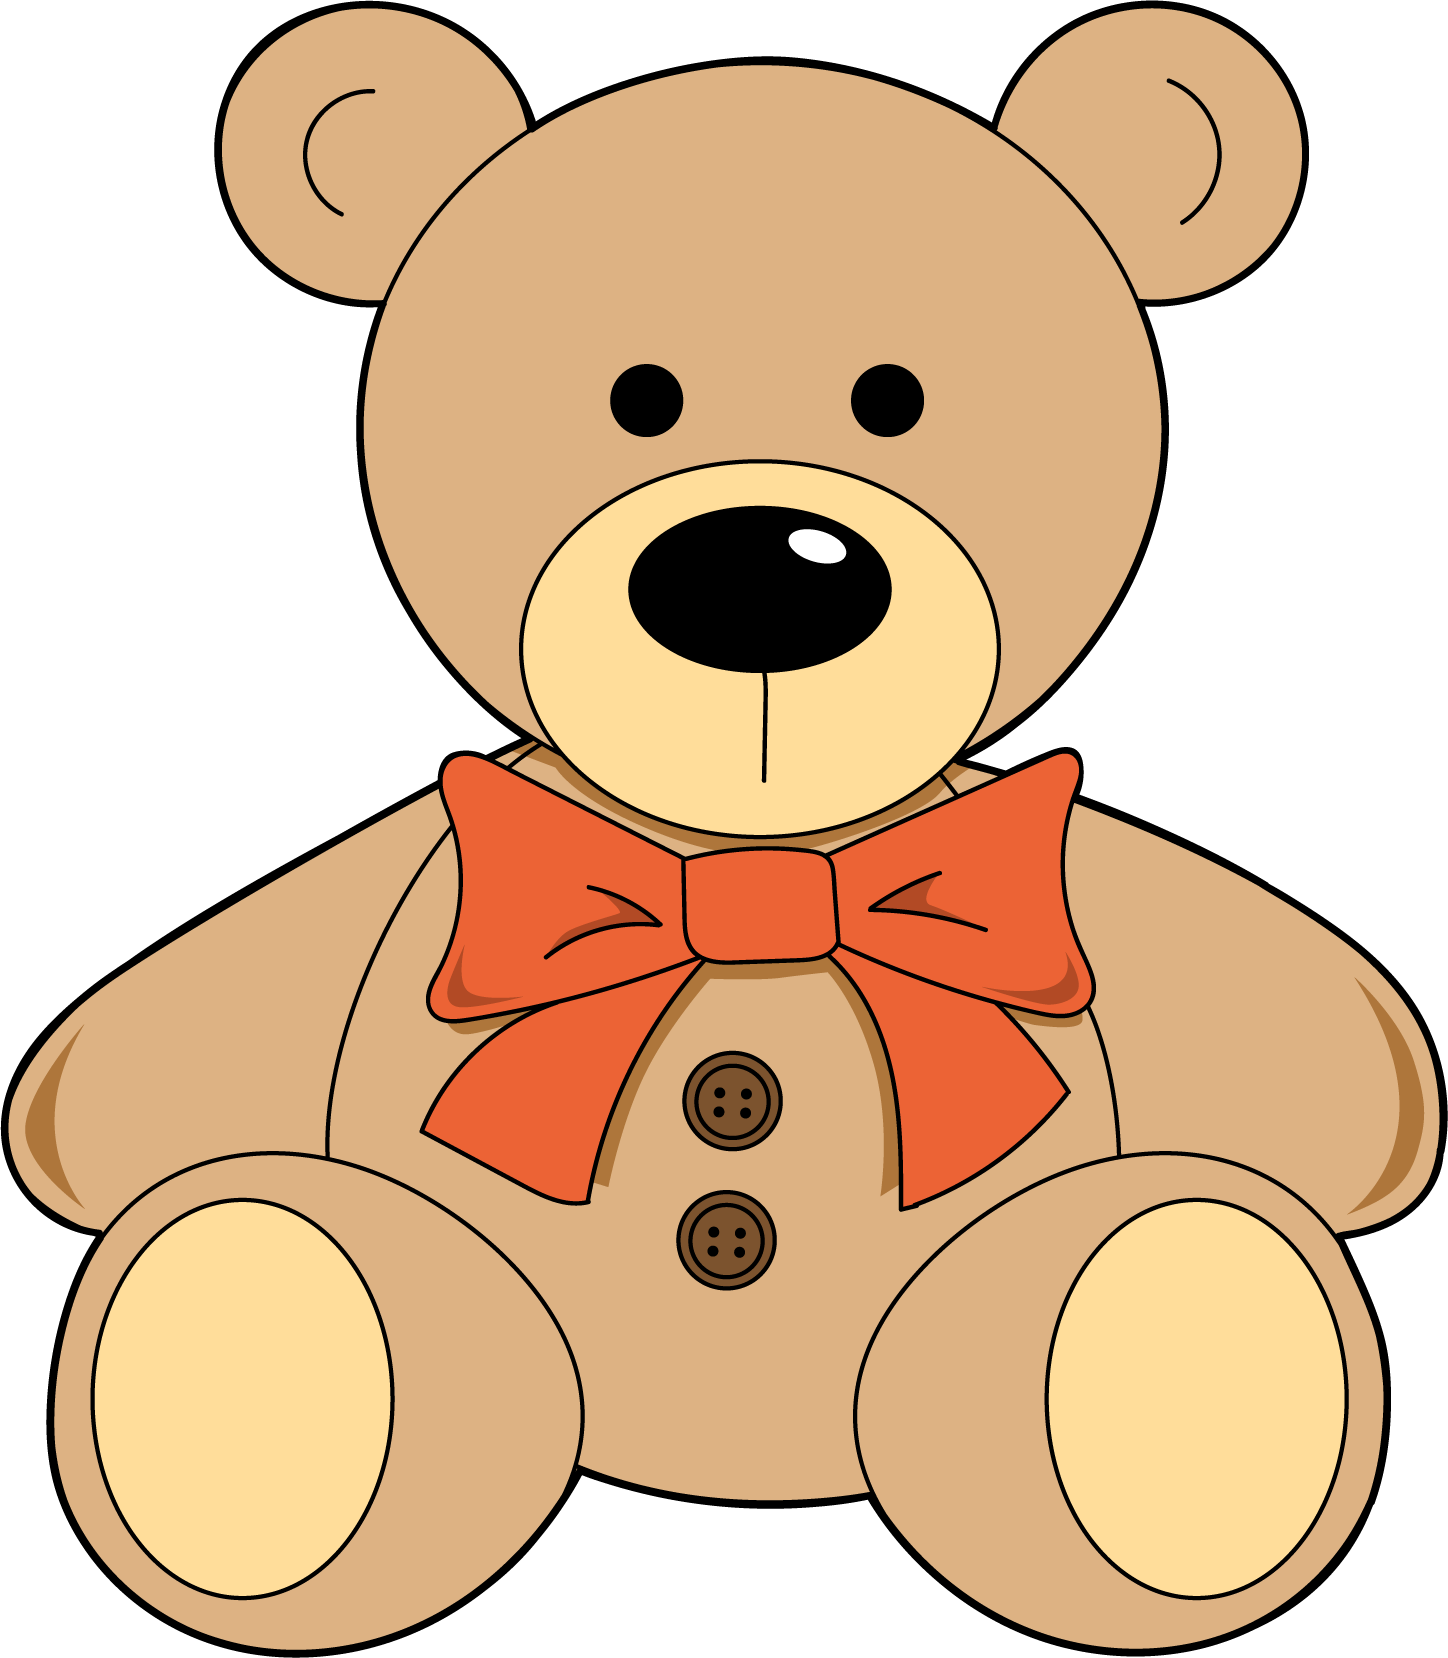 Brown teddy bear. Two buttons. Red bow tie.